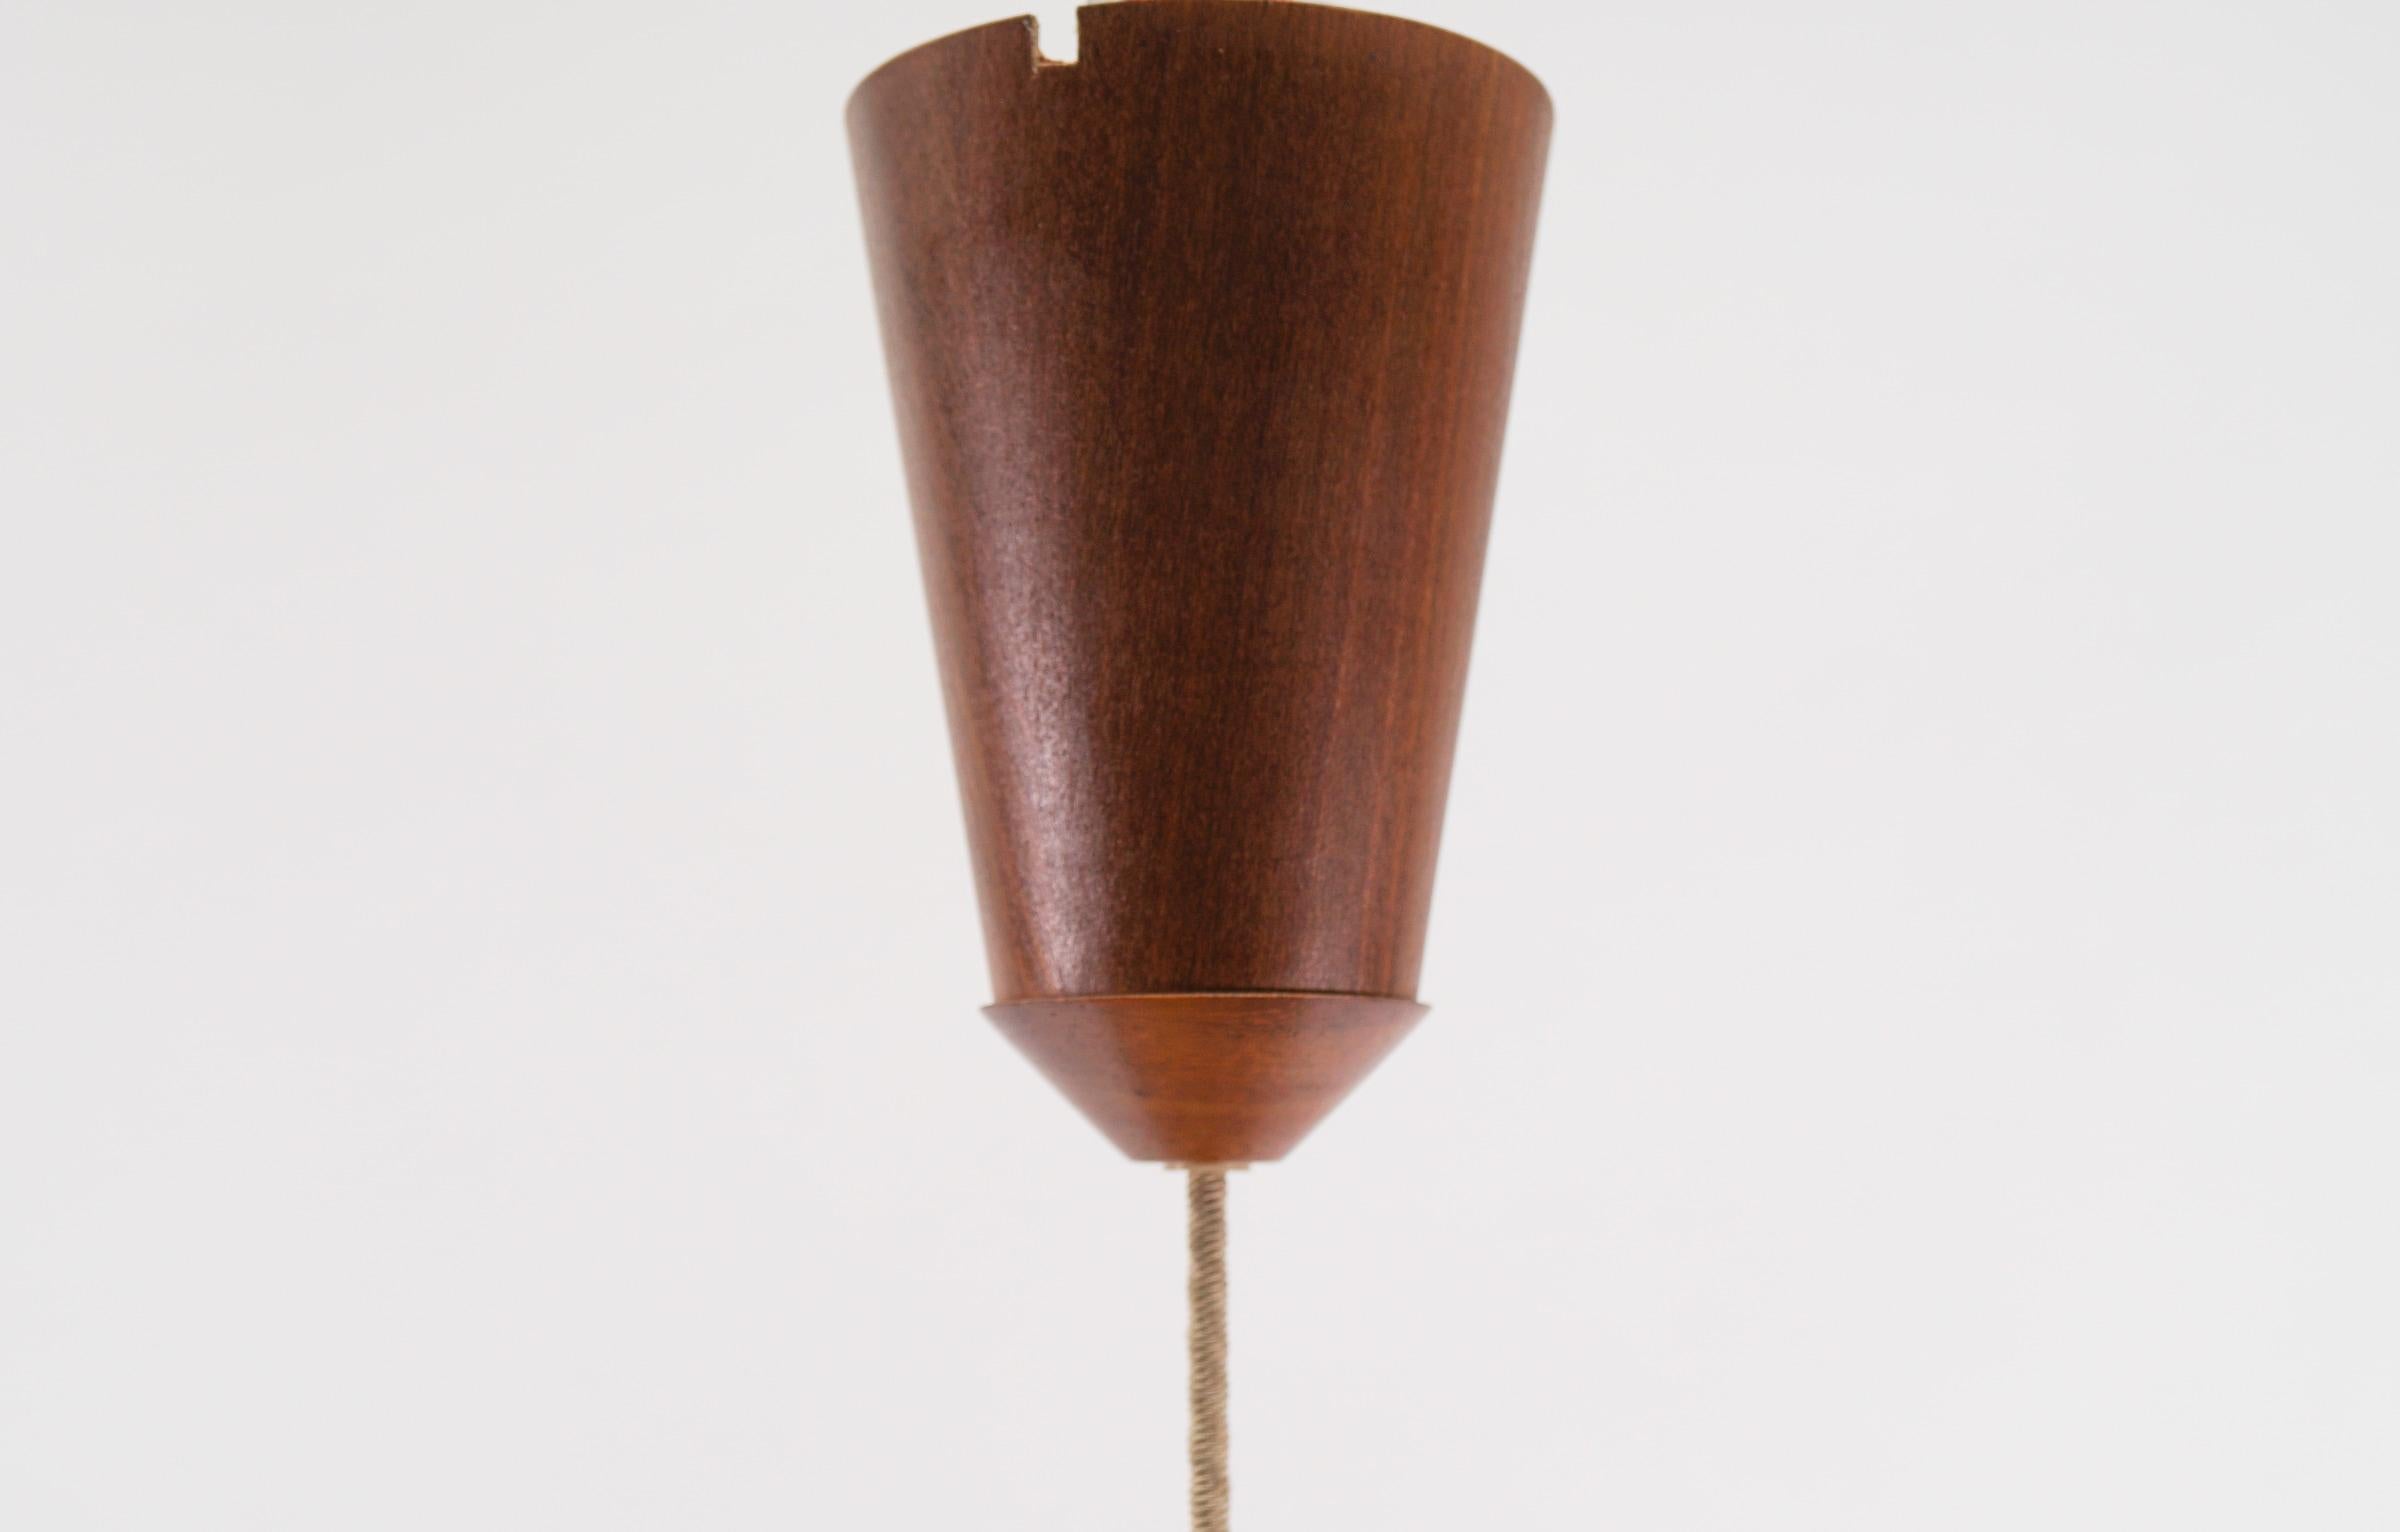 Lovely Adjustable Ceiling Lamp Made in Teak and Jute by Temde Swiss, 1960s For Sale 6